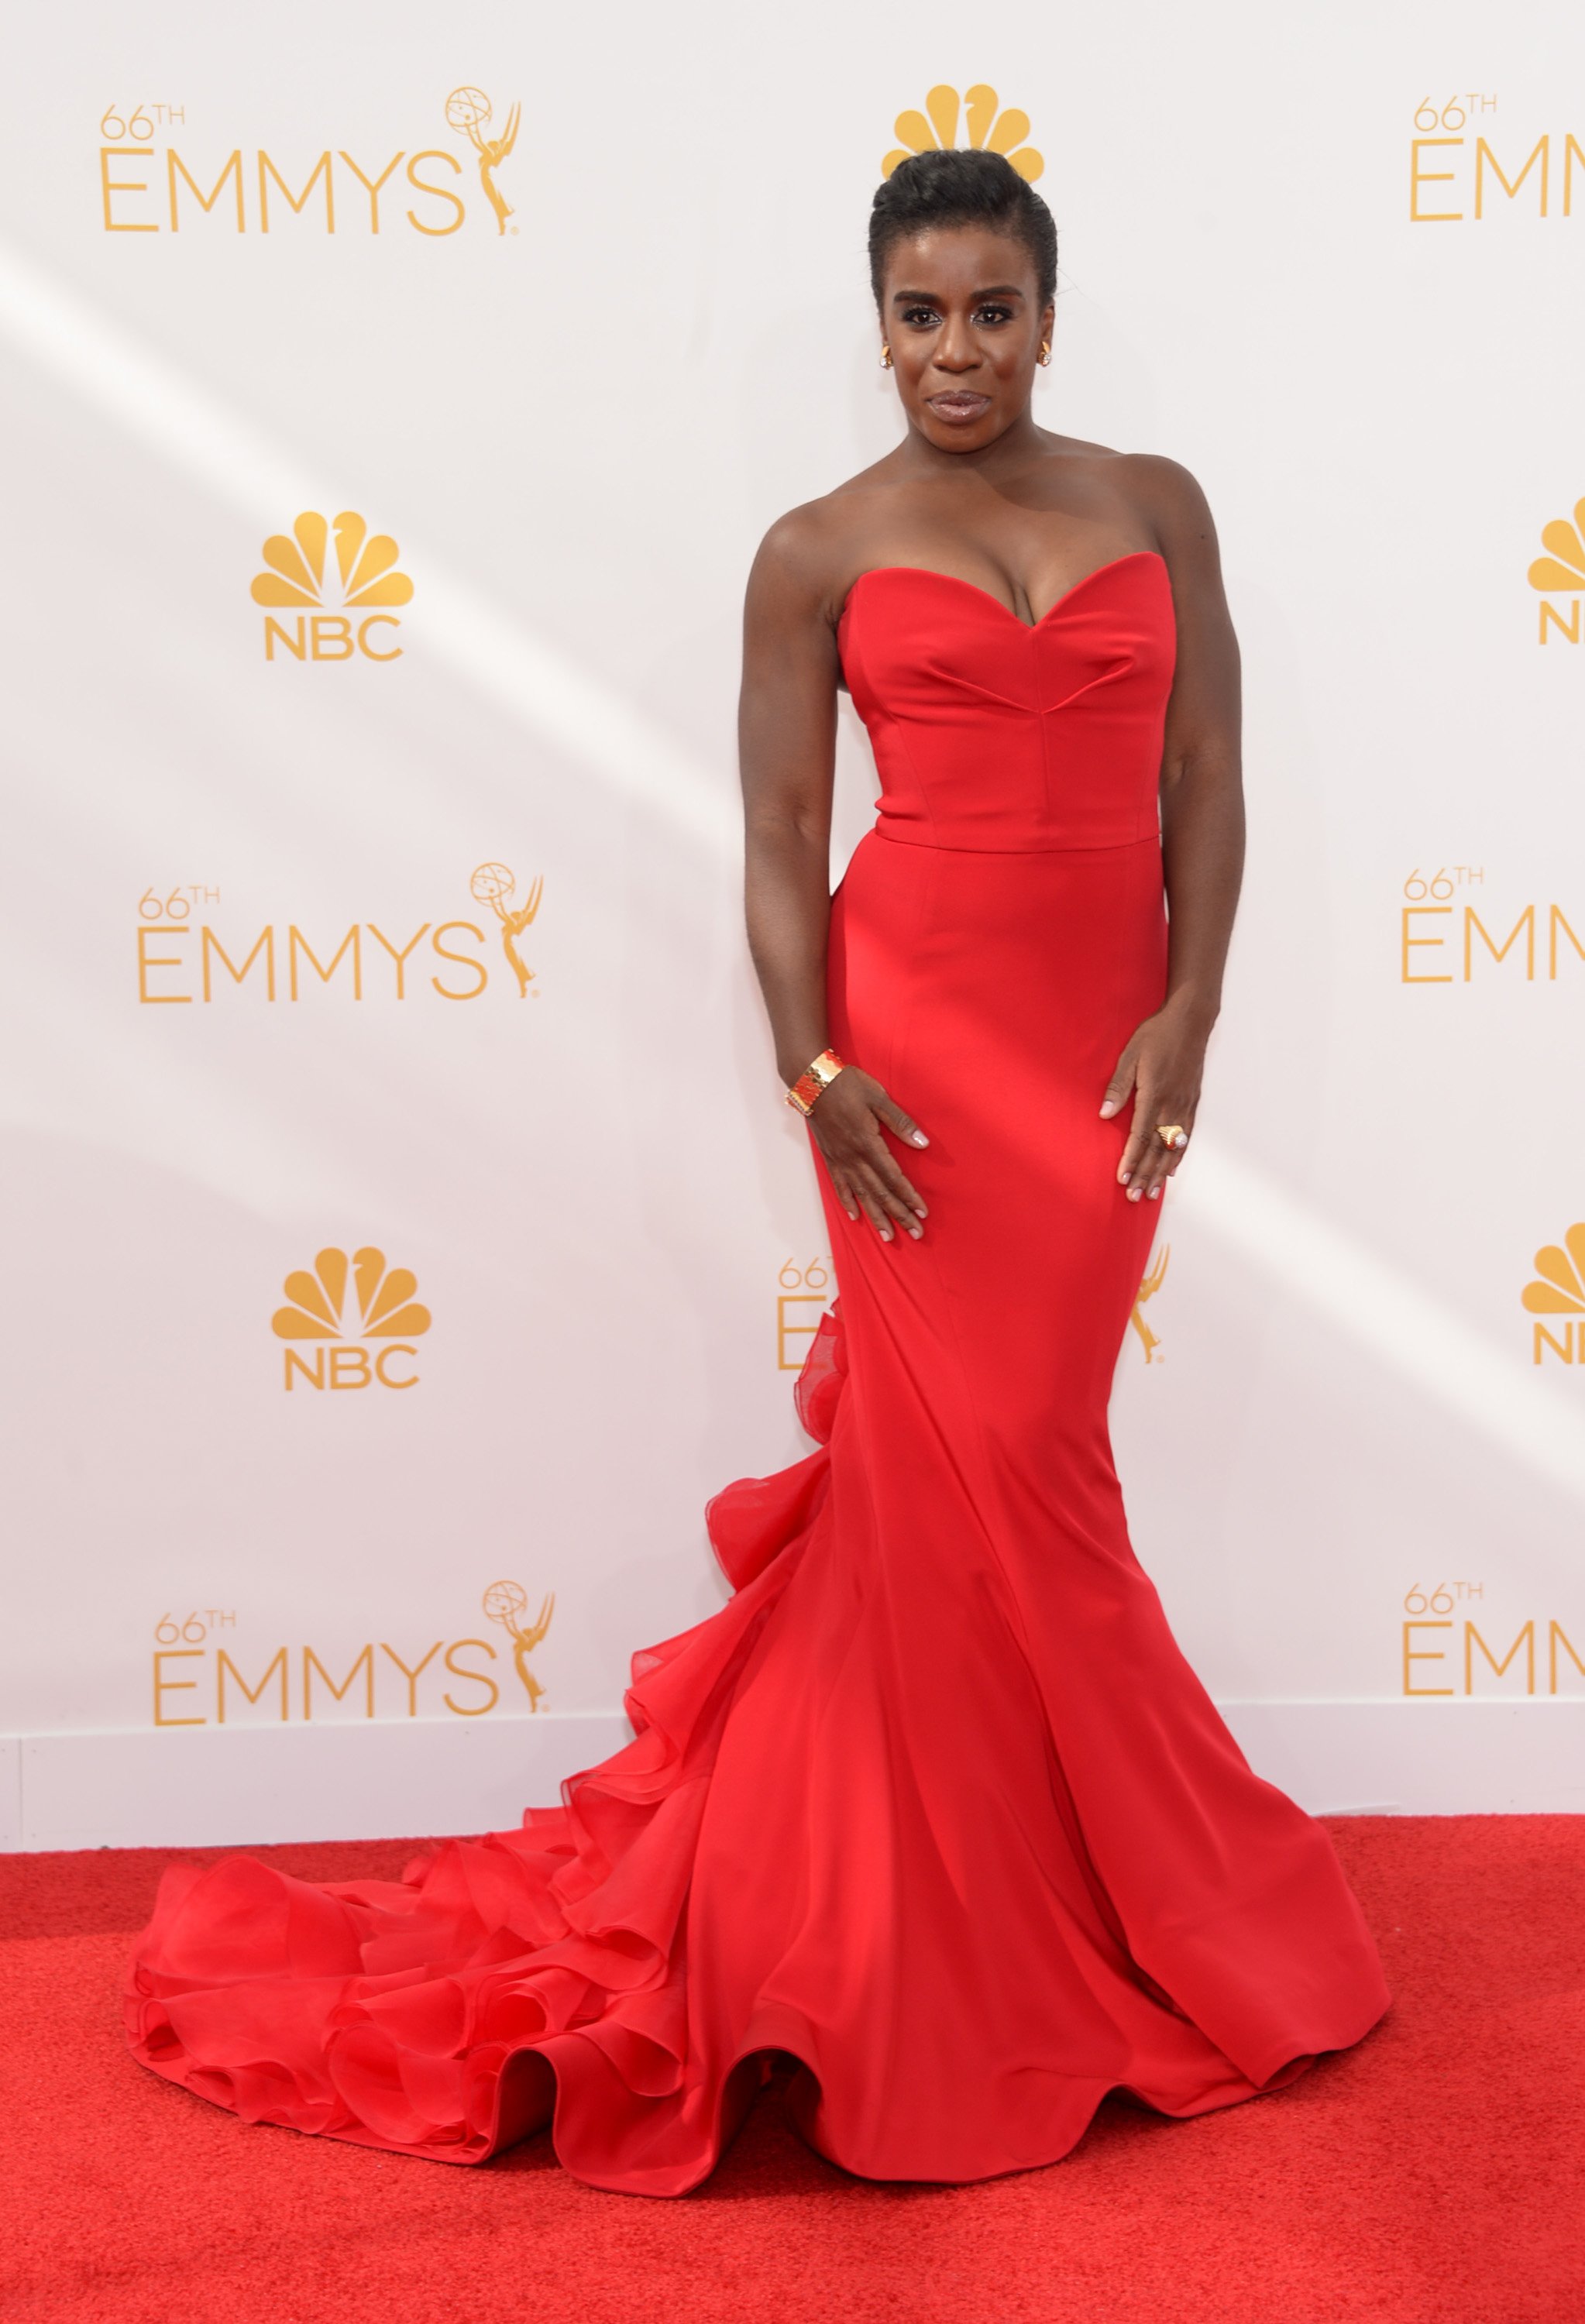 Uzo Aduba arrives at the 66th Primetime Emmy Awards at the Nokia Theatre L.A. Live on Monday, Aug. 25, 2014, in Los Angeles. (Evan Agostini—Invision/AP)